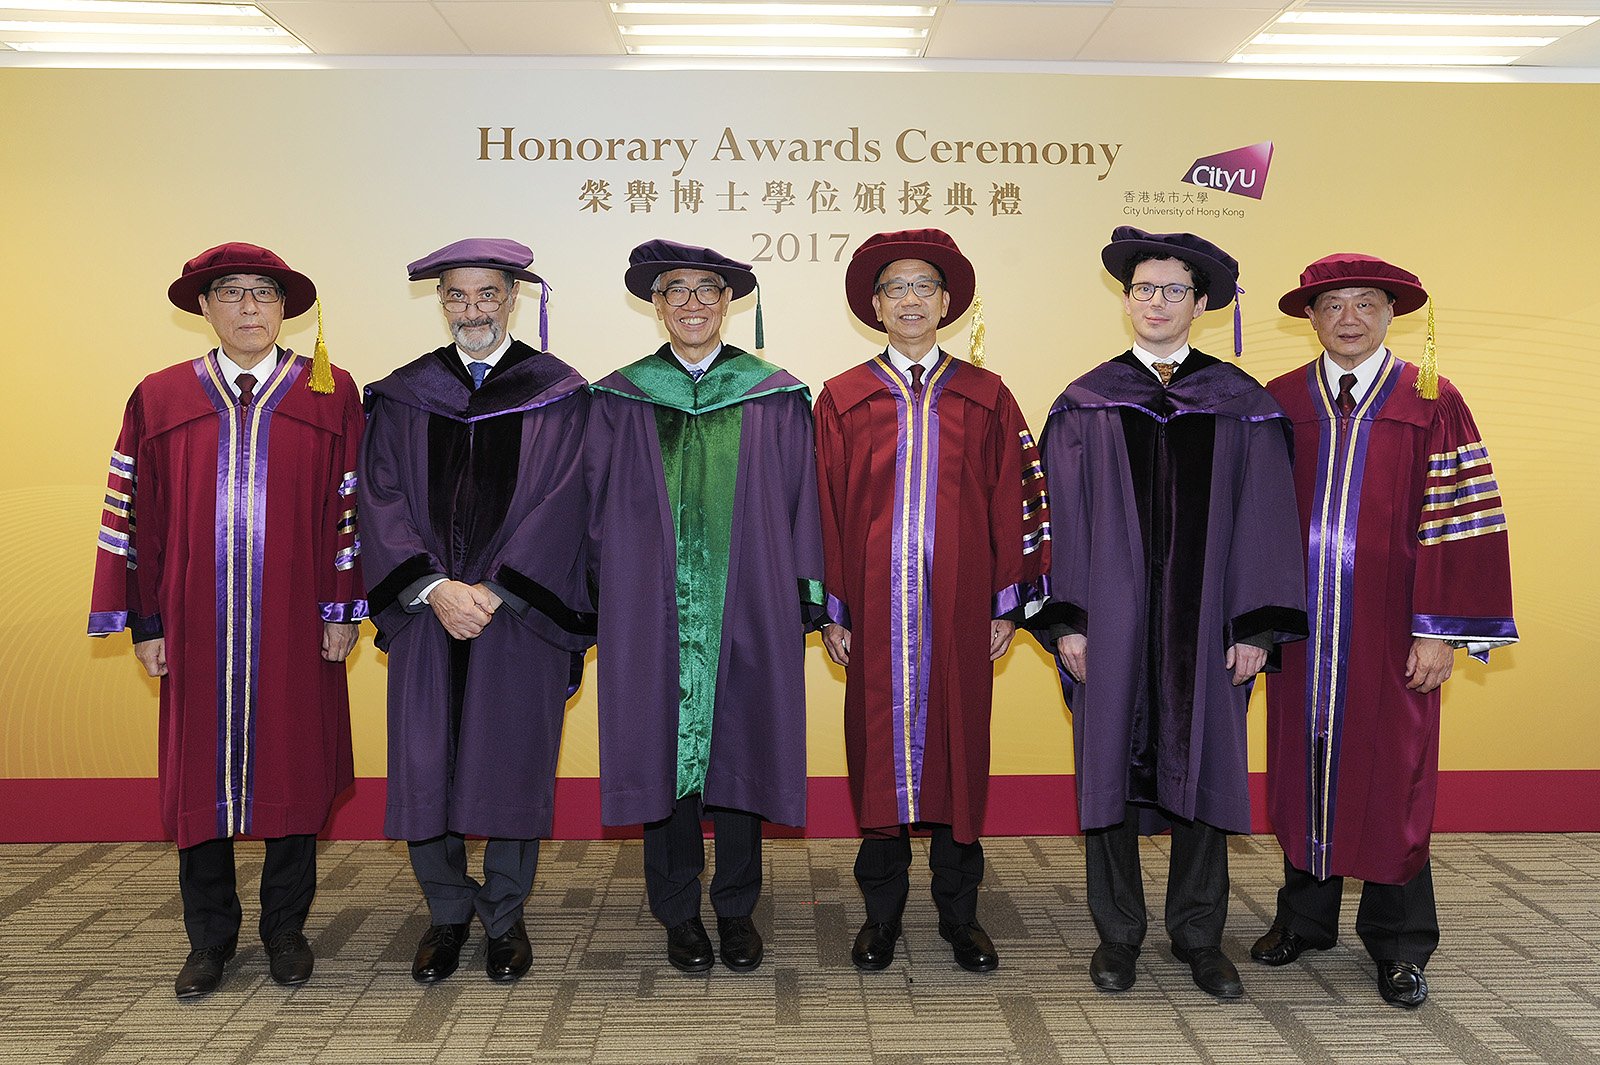 (From left) Professor Way Kuo, Professor Serge Haroche, Dr Joseph Lee, Dr Chung Shui-ming, Professor Wendelin Werner and Mr Herman Hu Shao-ming.